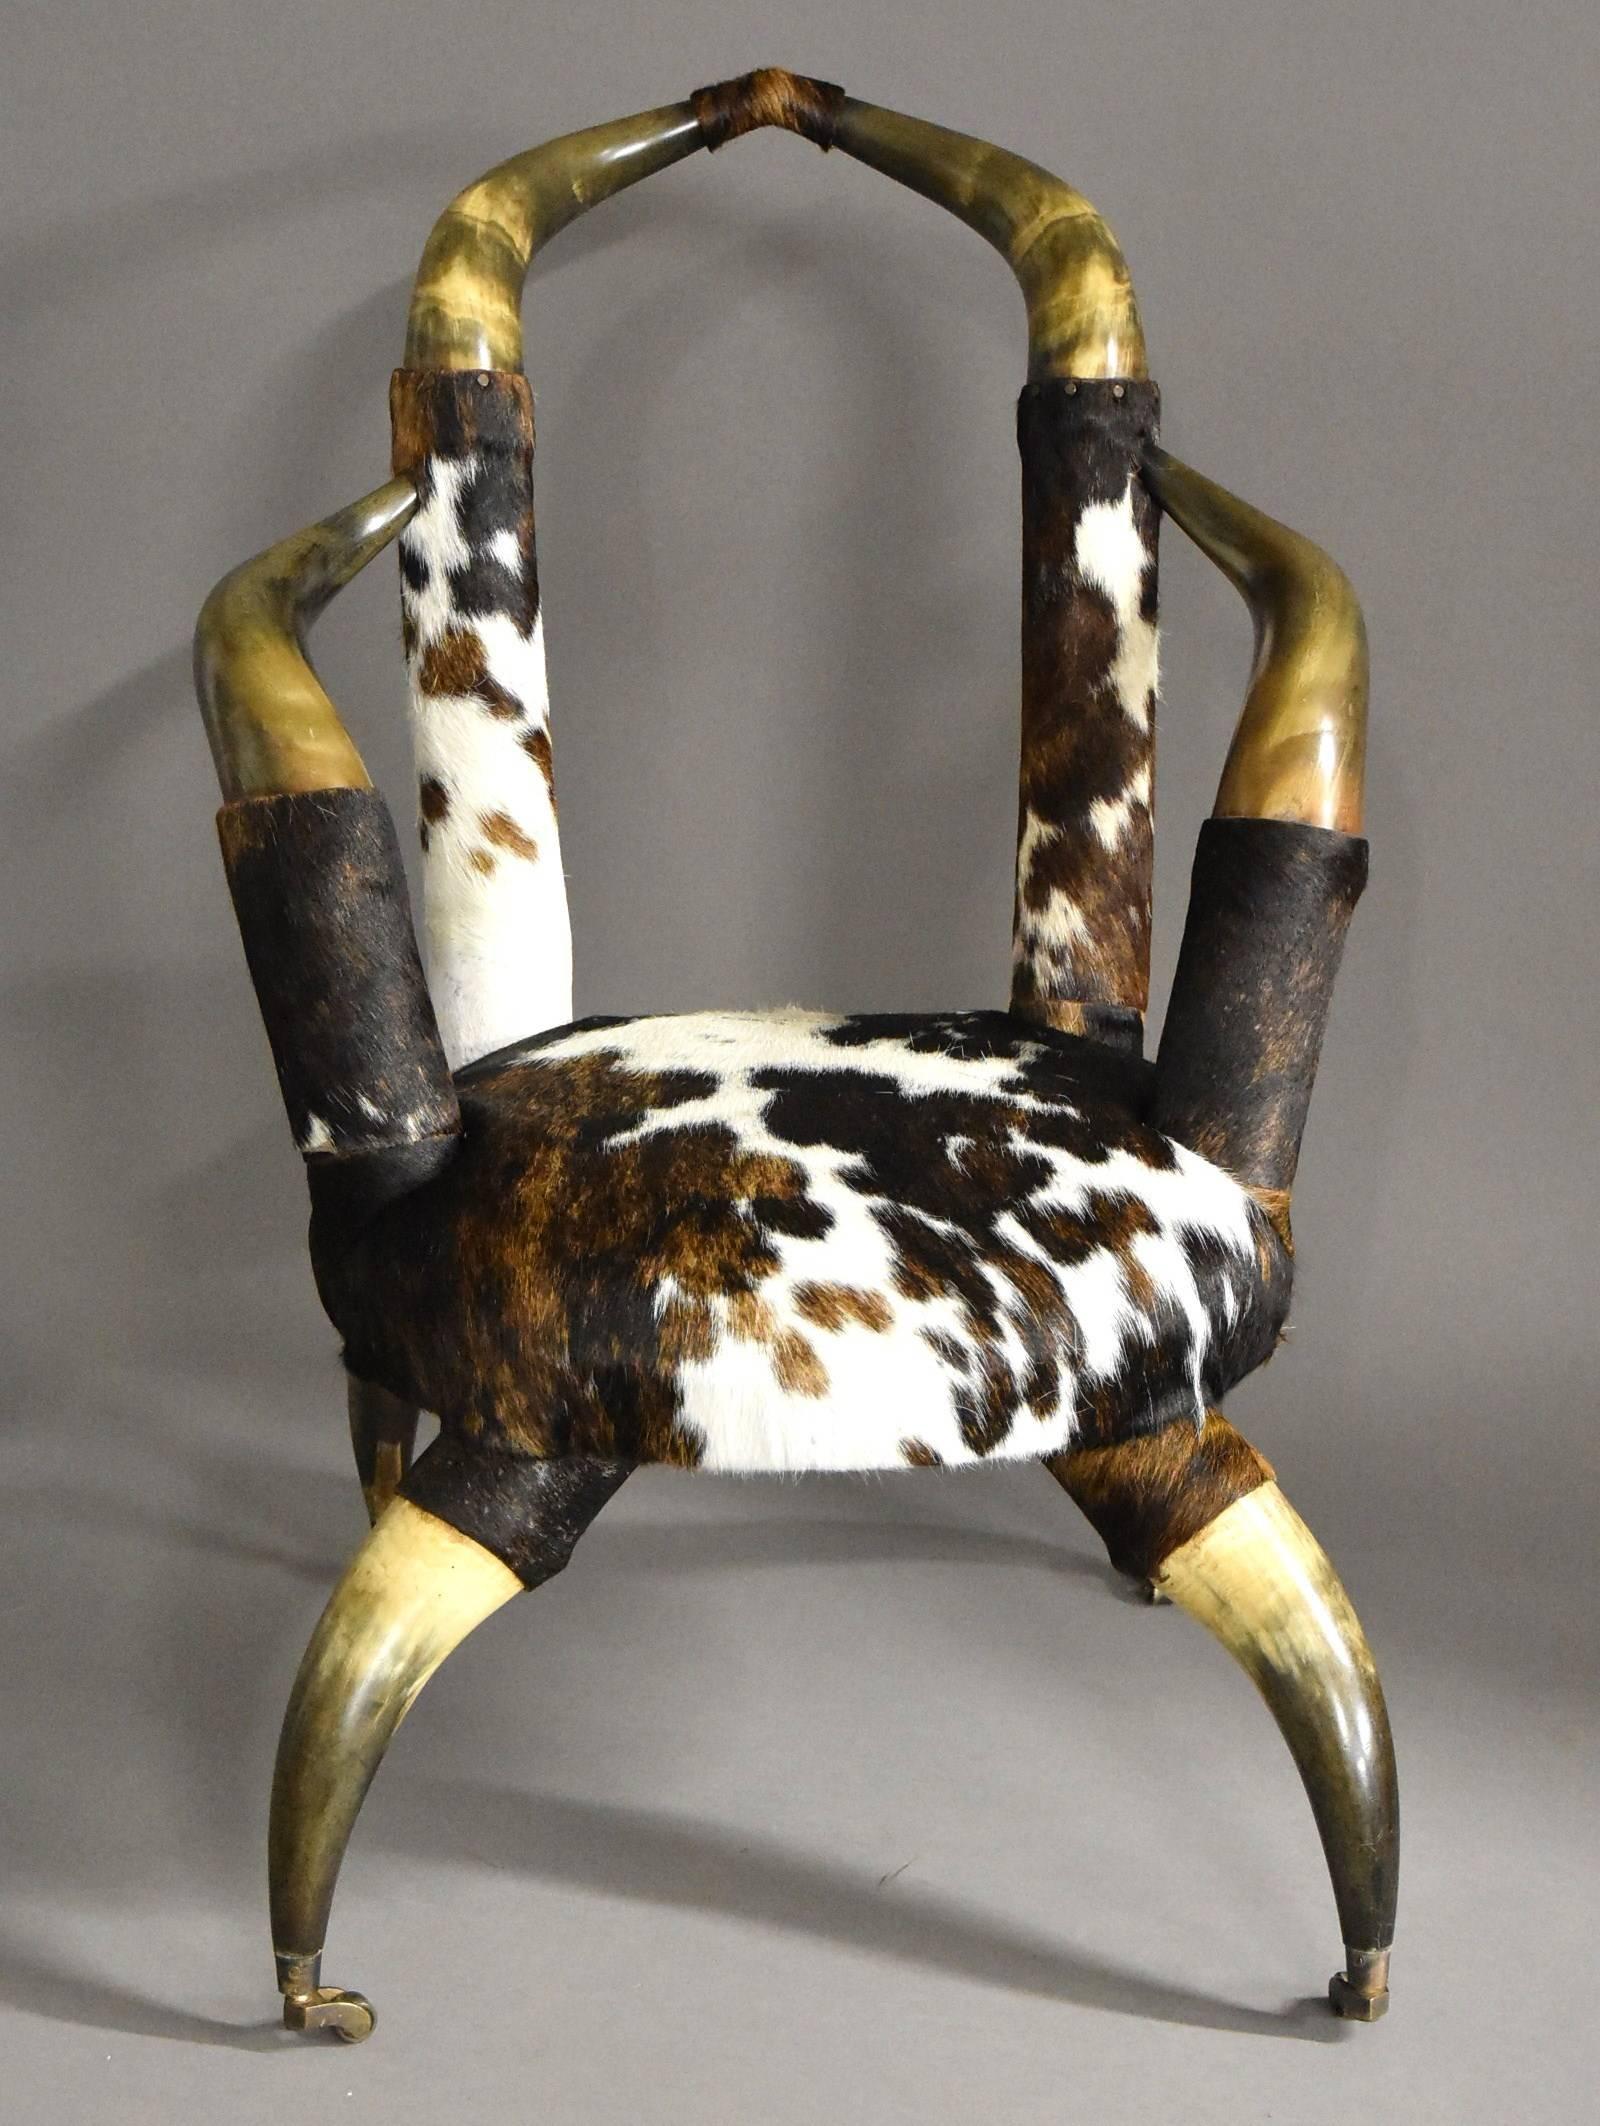 Austrian Rare Late 19th Century Decorative Bull Horn Armchair, Re-Upholstered in Cow Hide